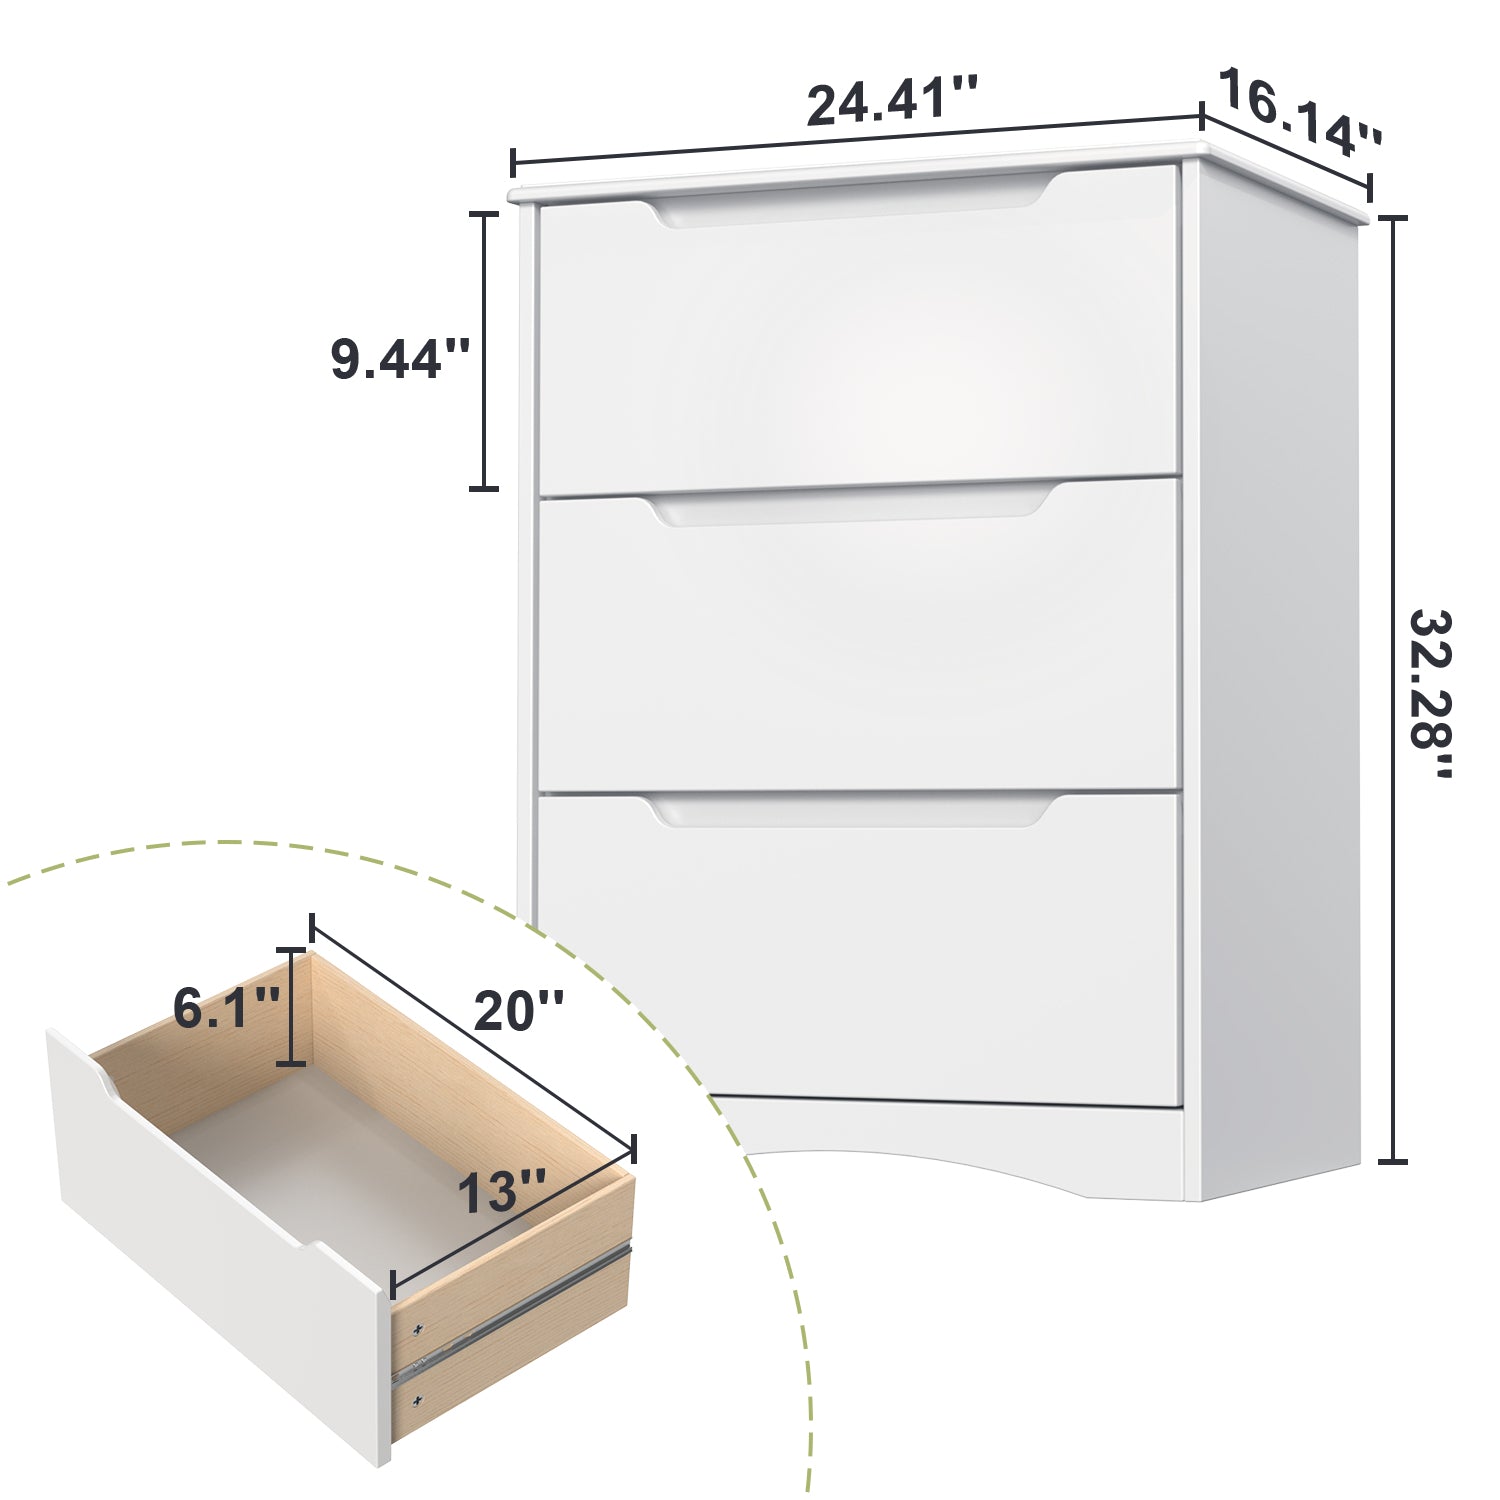 Gizoon AP21 3 Drawer Dresser, White Chest of Drawers with Large Storage Capacity